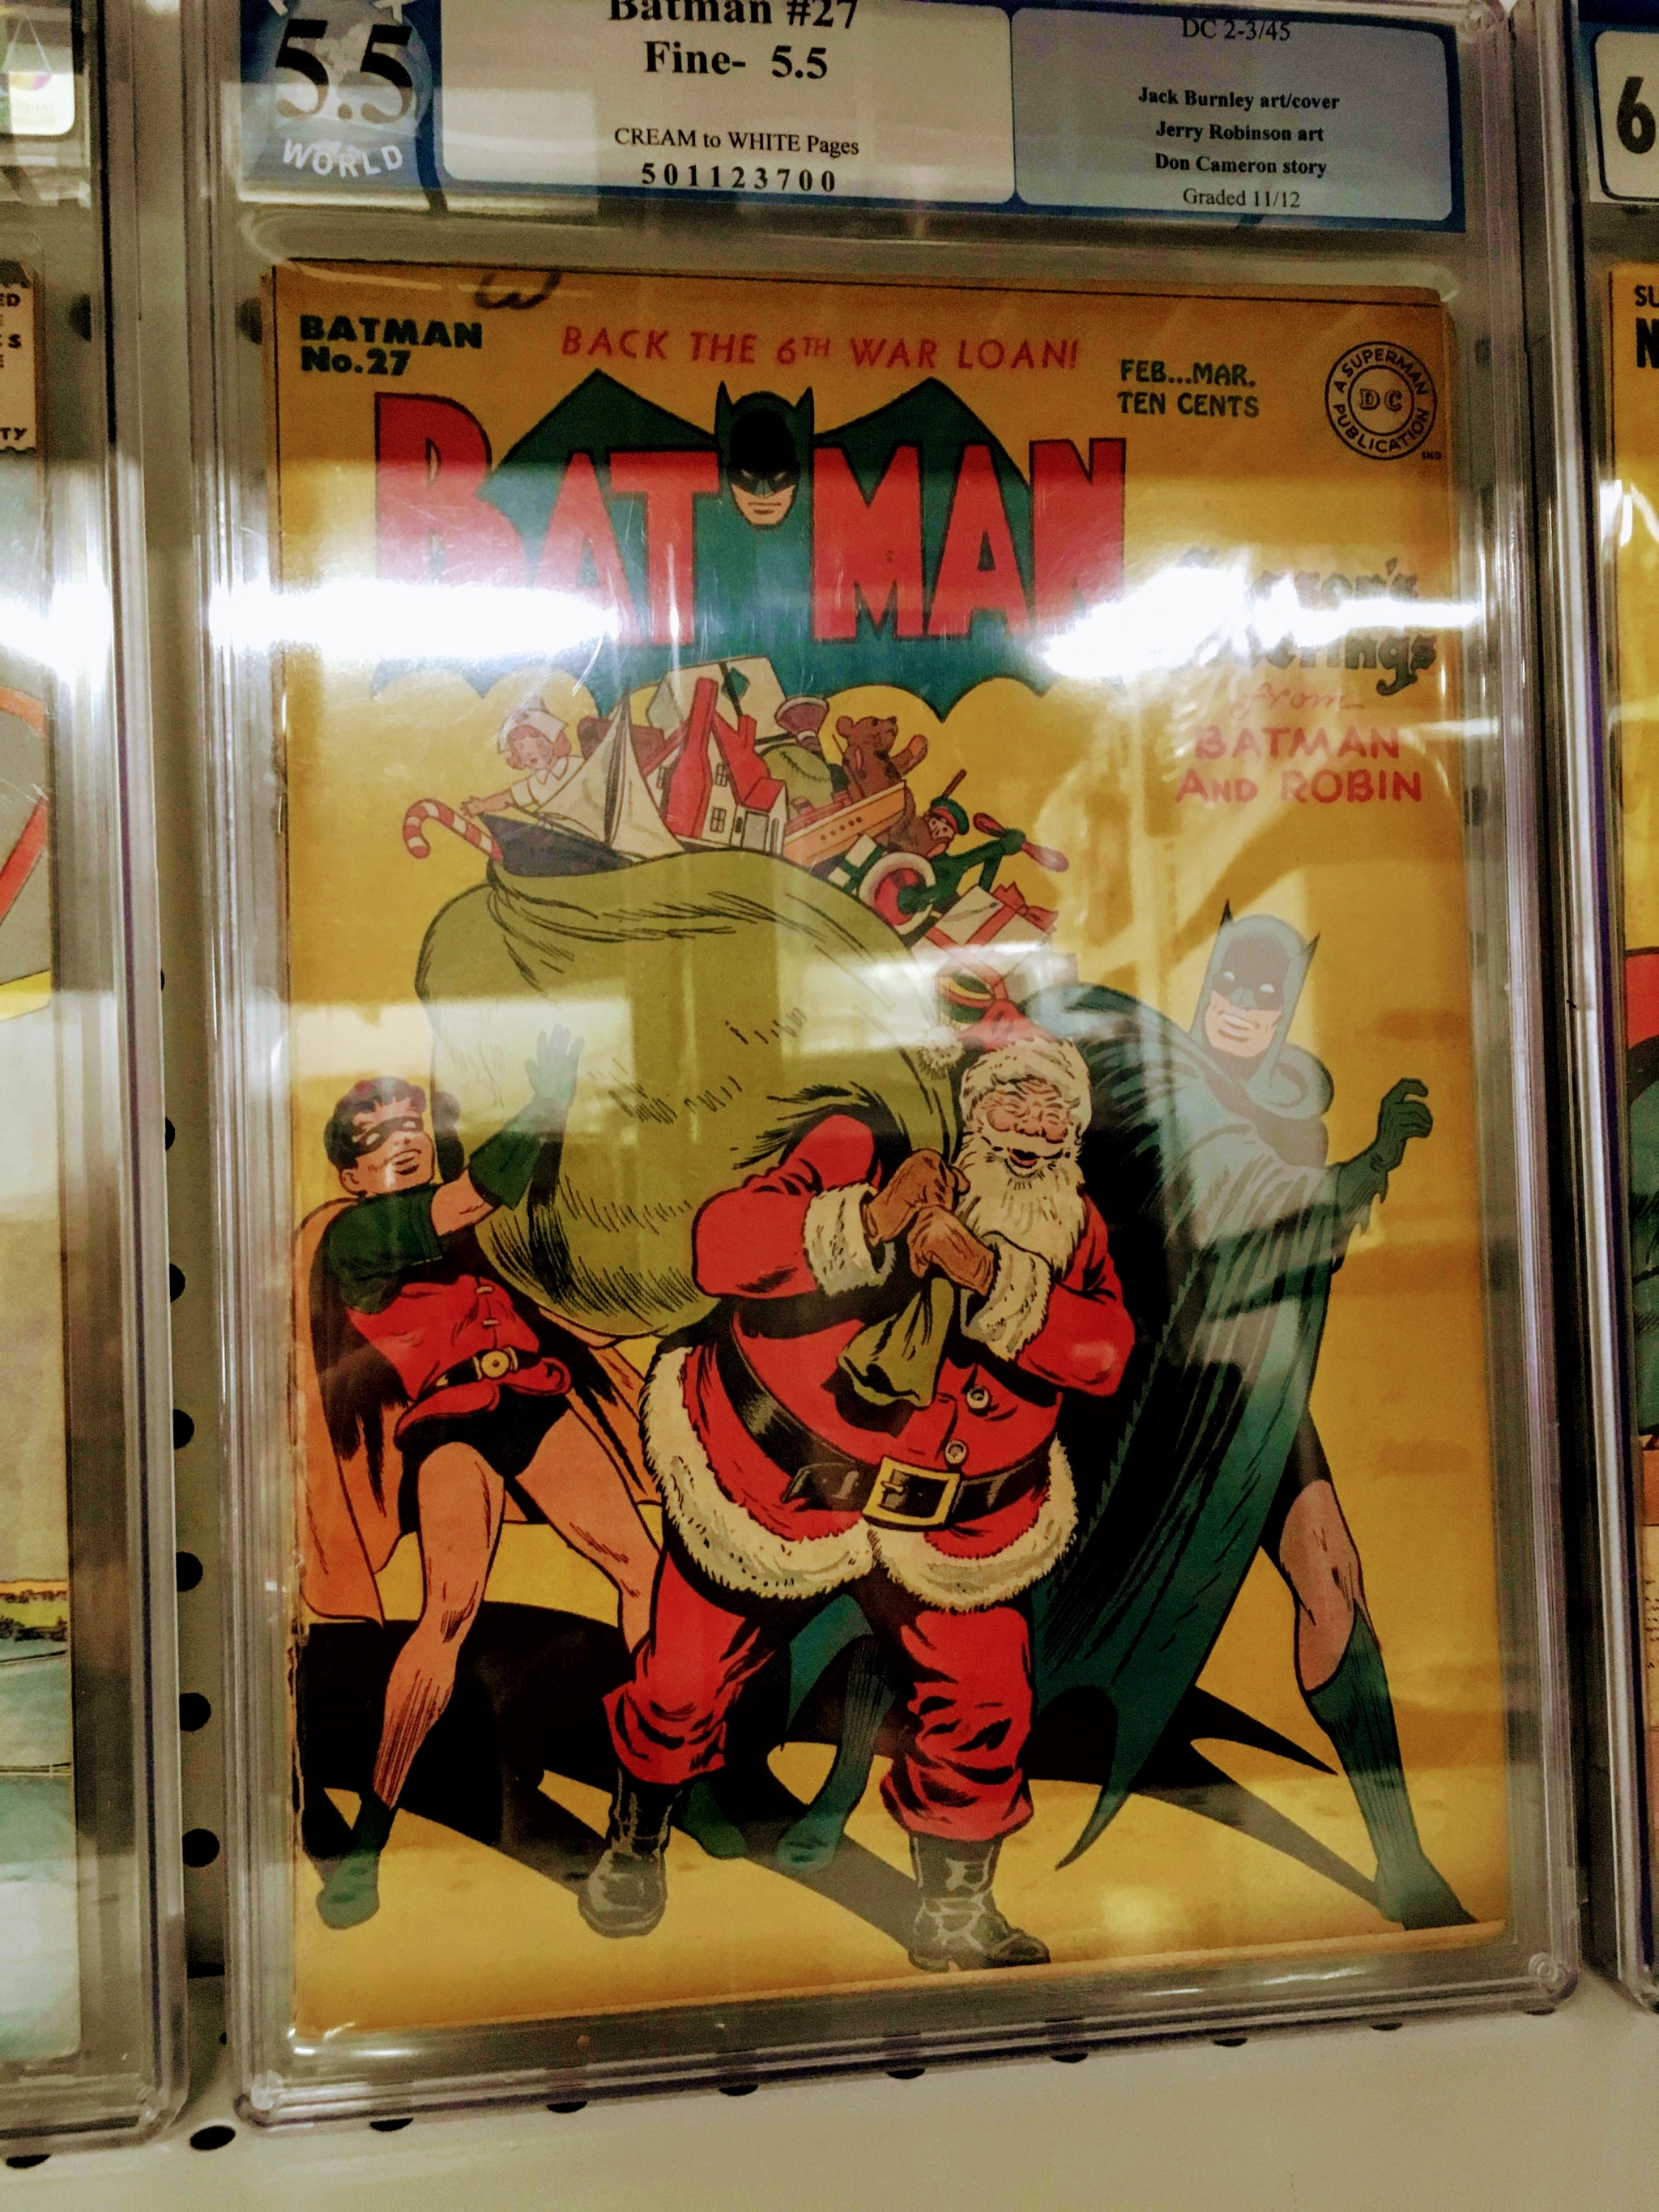 Legion is one of the Birmingham comic book stores where you can find rare comics.